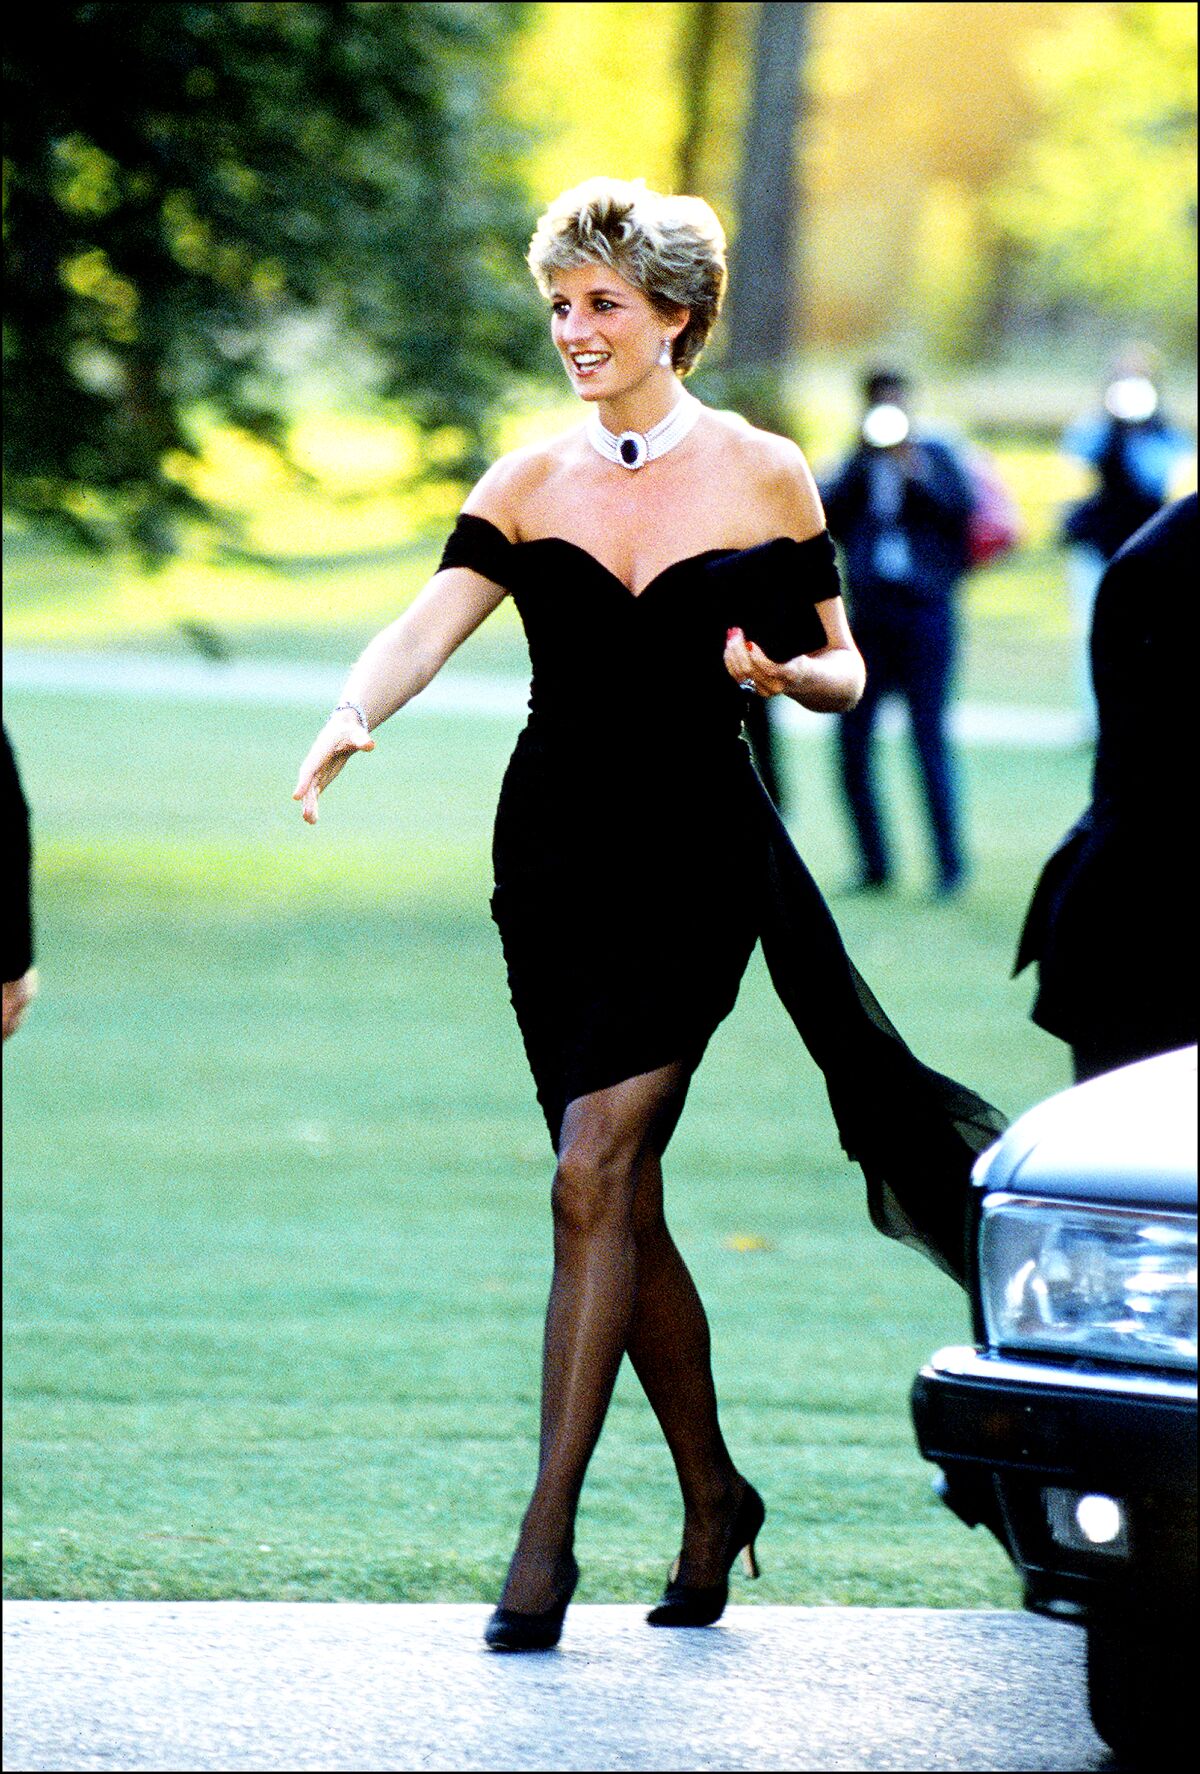 June 1994: Princess Diana wears an off-the-shoulder, short black dress by Christina Stambolian, known as the Revenge Dress.